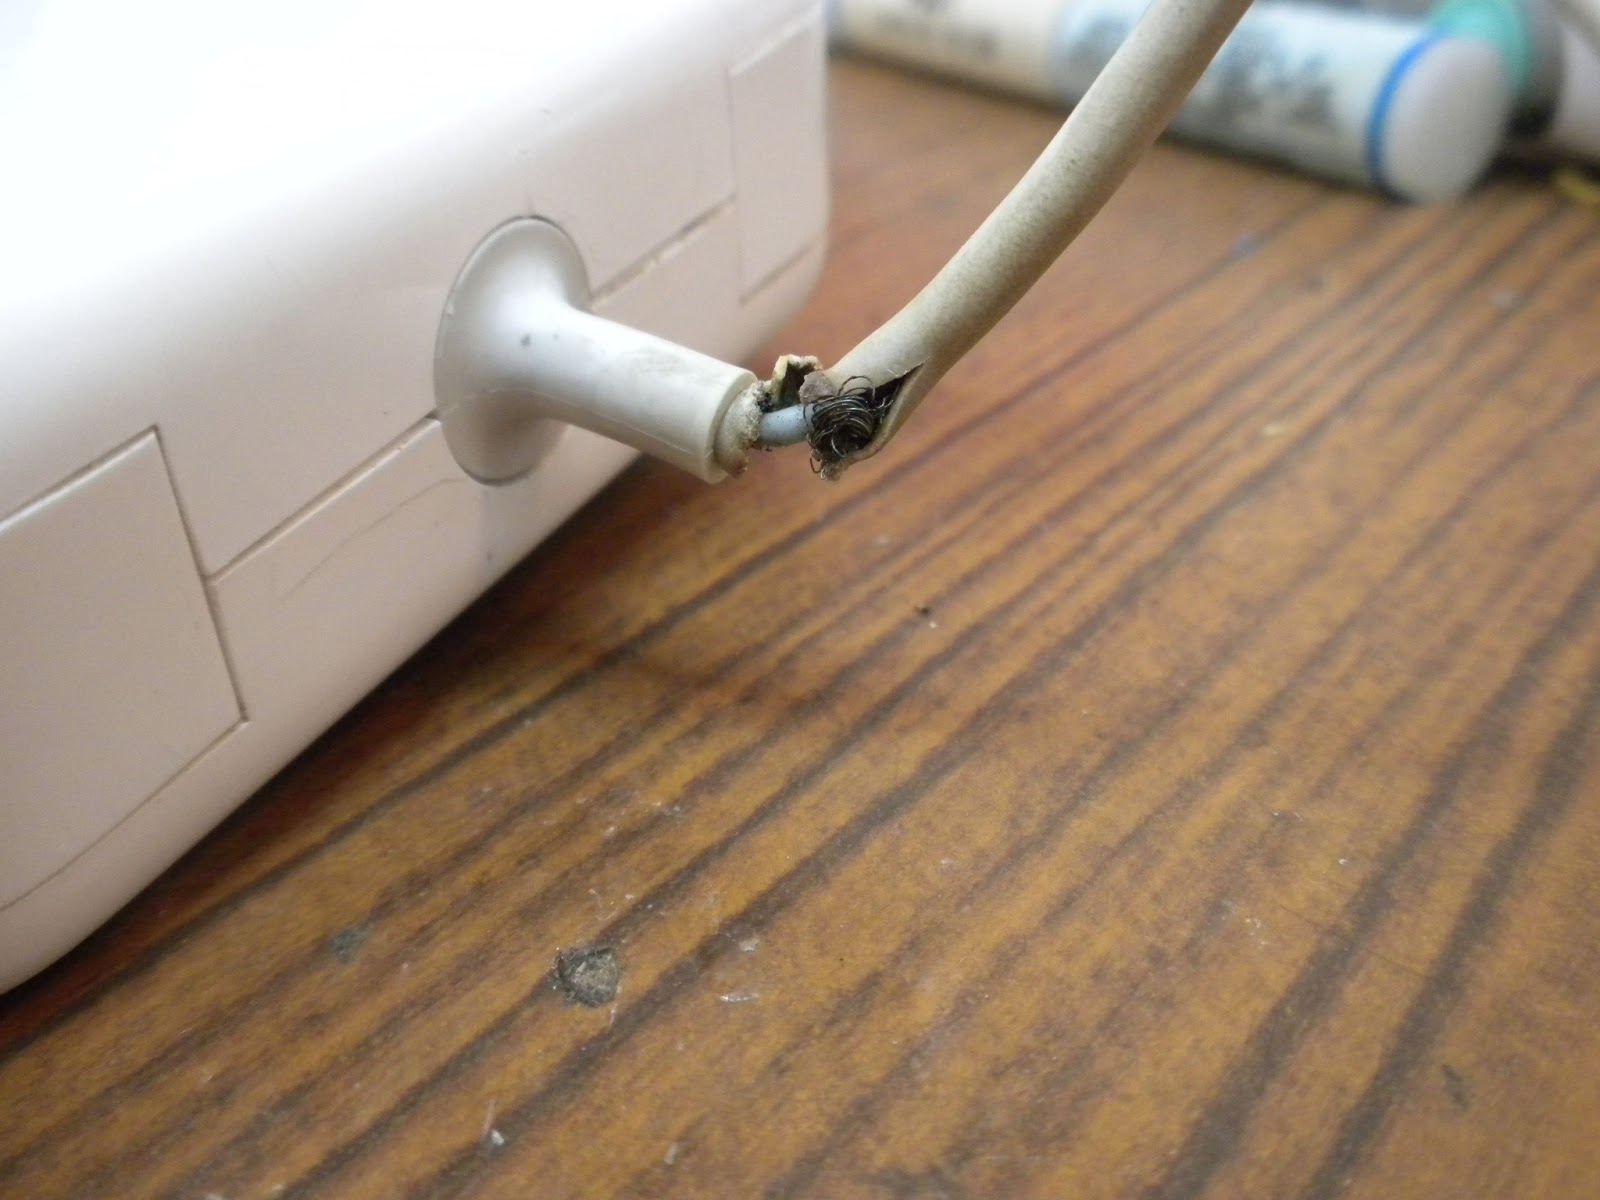 ... : Repairing a charred/burned/broken cable on an Apple Magsafe charger